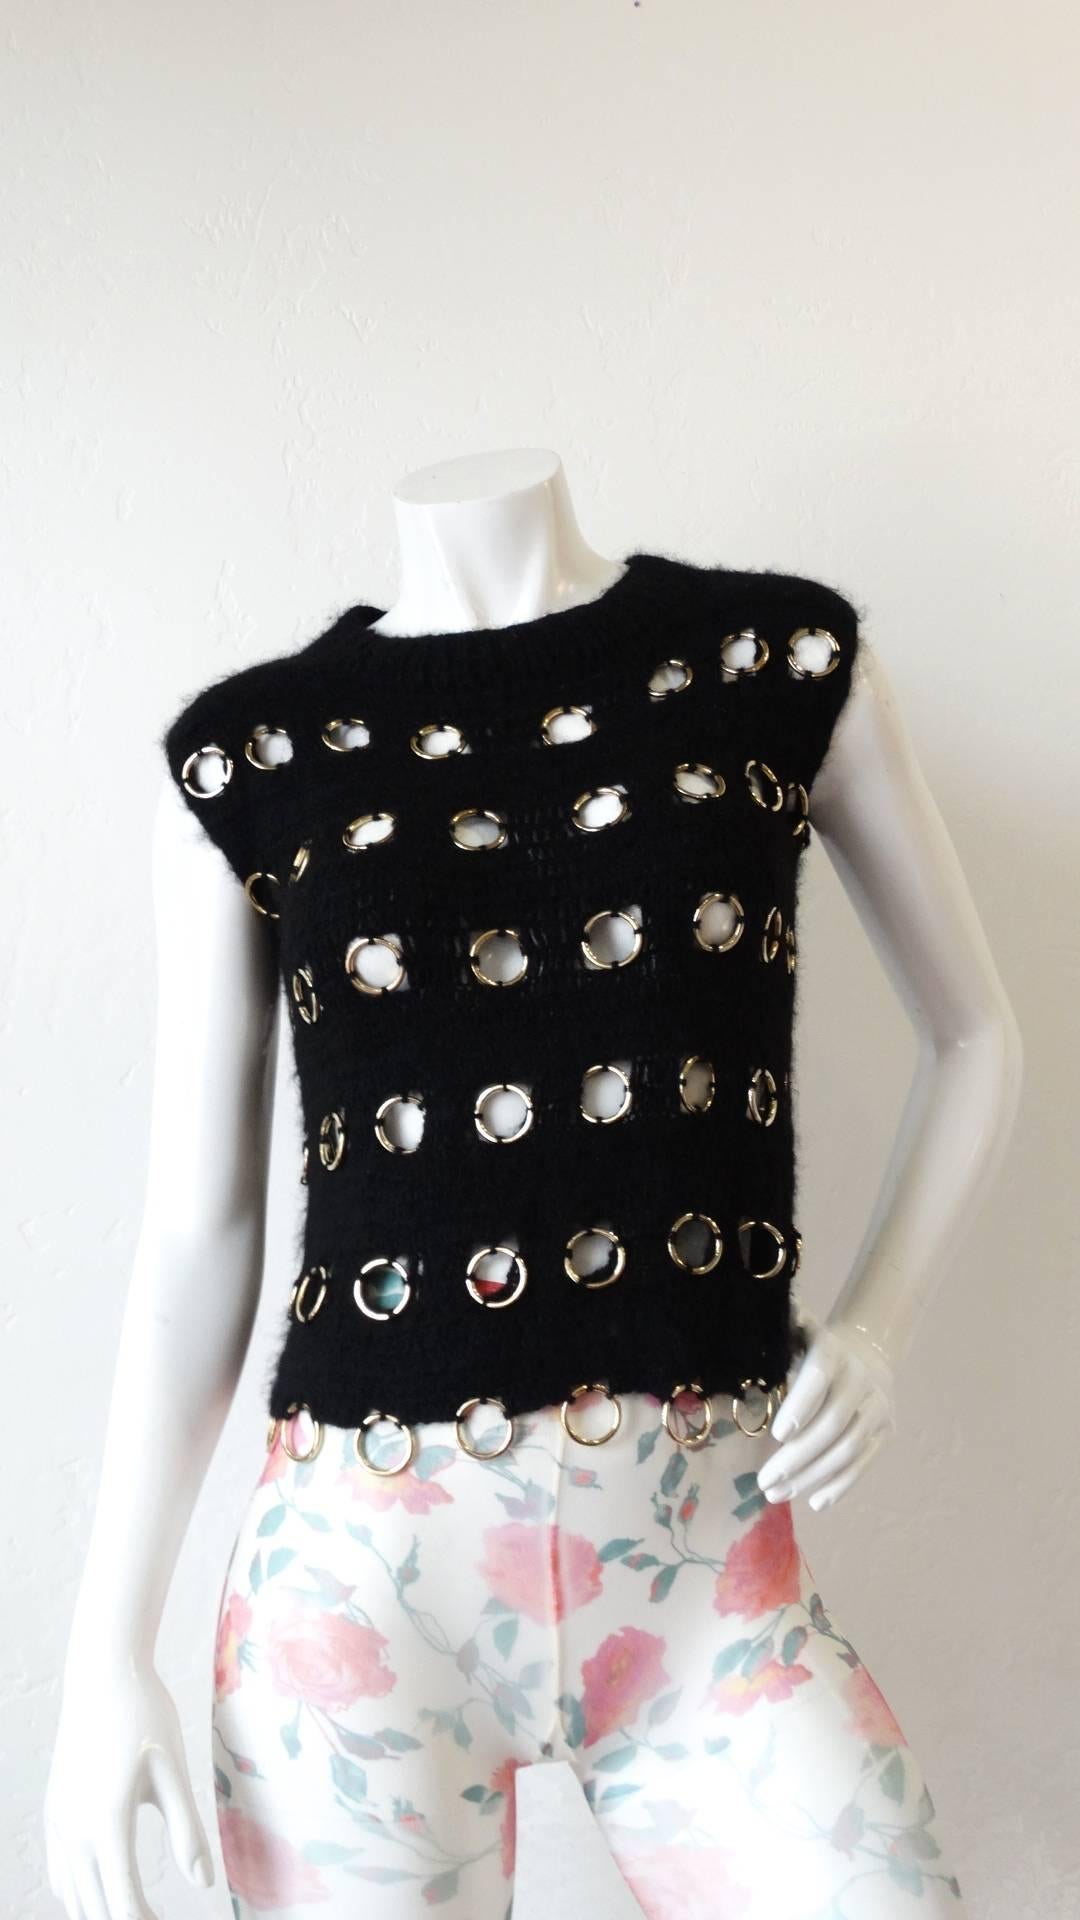 Rock a layered look with some edge with our amazing 1990s grommet knit top! Black crochet knit fabric with silver metal o-rings woven throughout.  Sleeveless fit with a high neckline. Wear with your favorite white button down underneath- or with